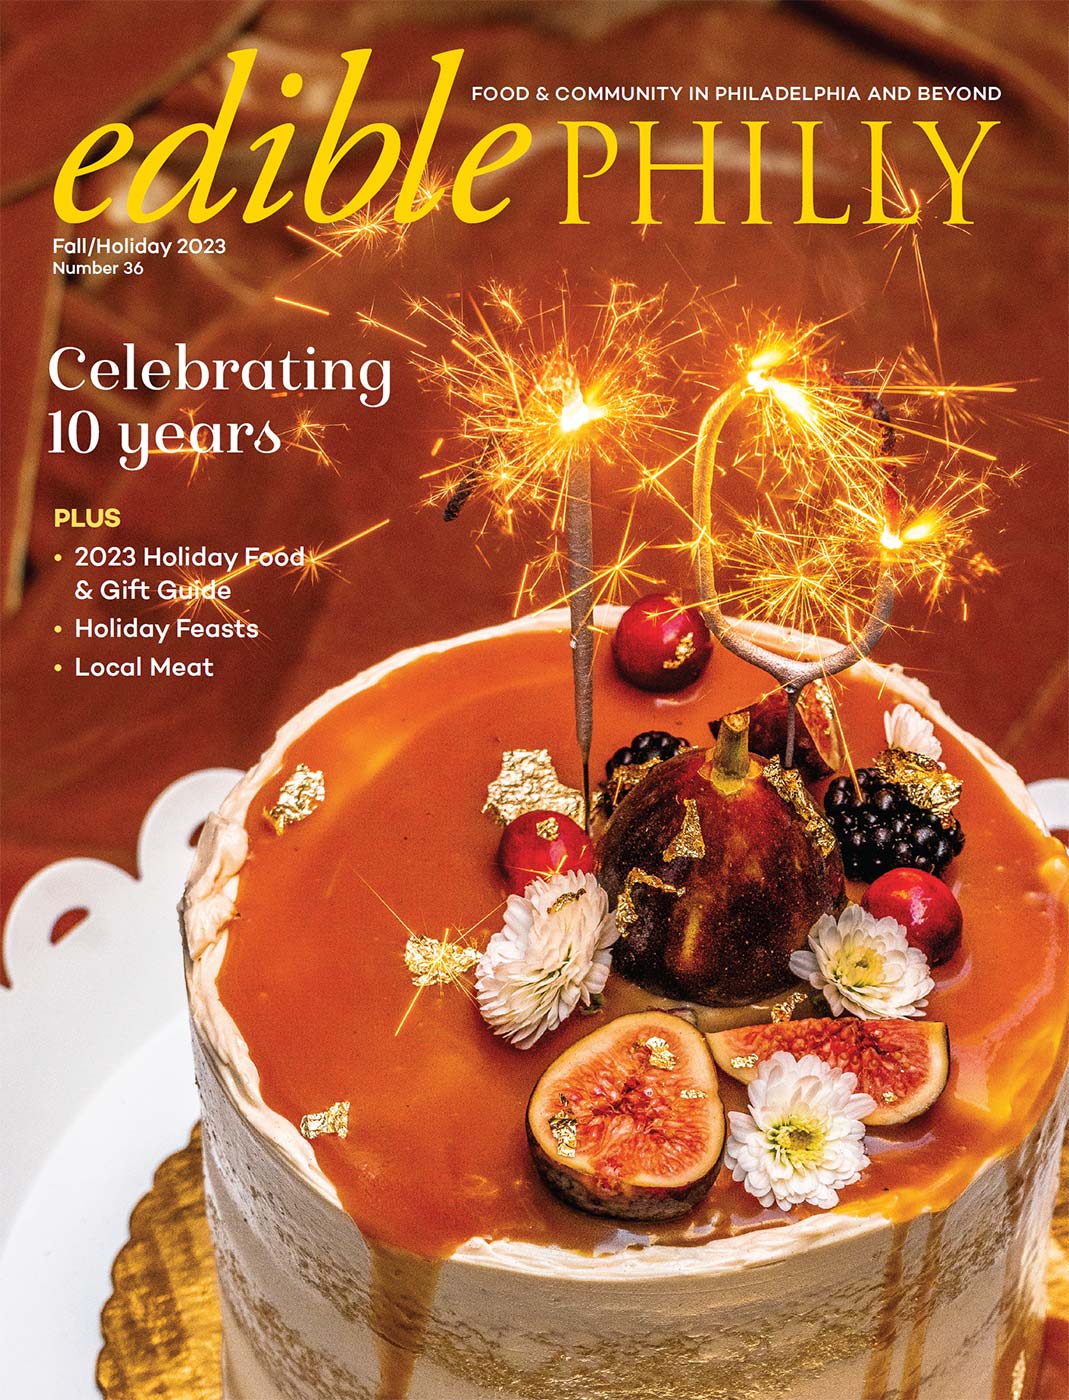 https://ediblephilly.ediblecommunities.com/sites/default/files/images/publisher/cover/cover-philly-fall-hol-23.jpg